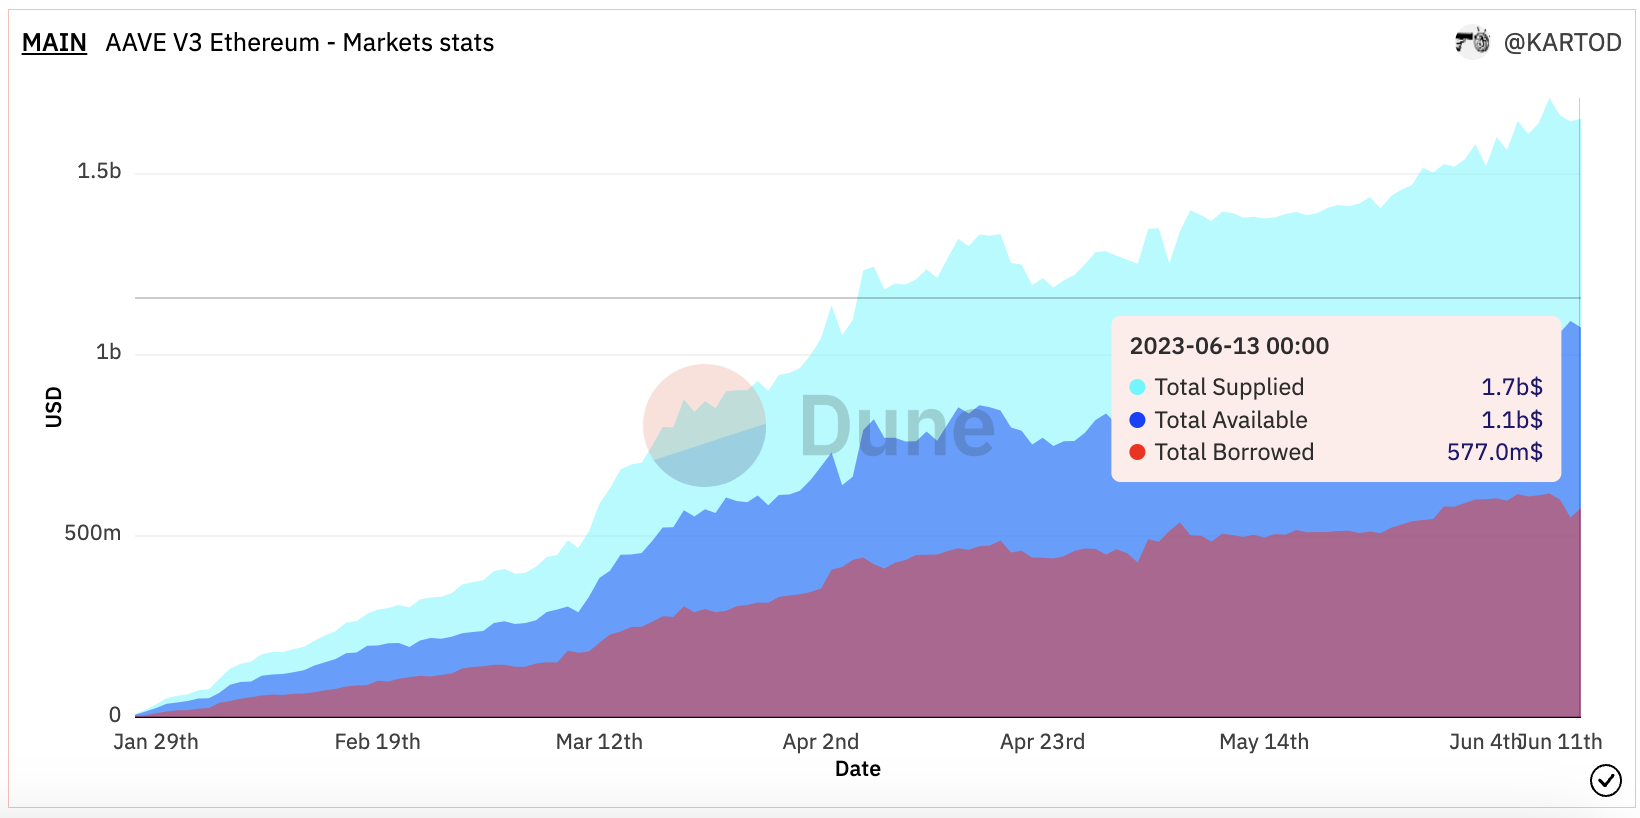 Aave, the market leader in DeFi lending has seen constant growth when it comes to TVL, volume and usage - showcasing clear demand for decentralized money markets.